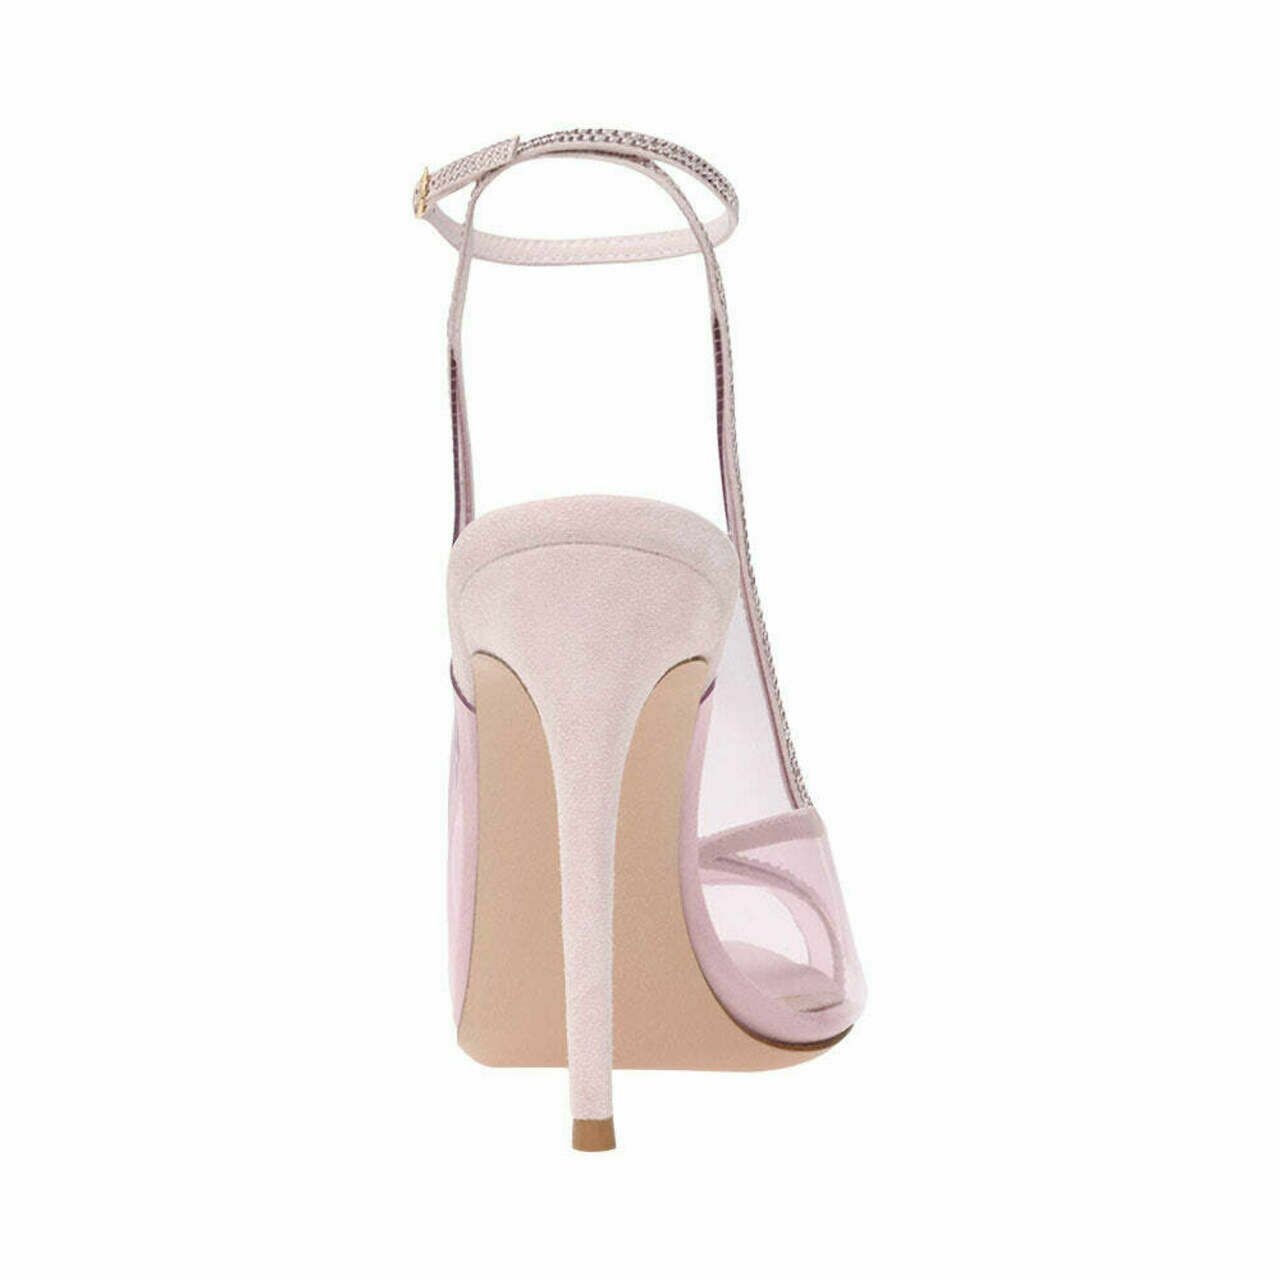 Gianvito Rossi Pink Sandals